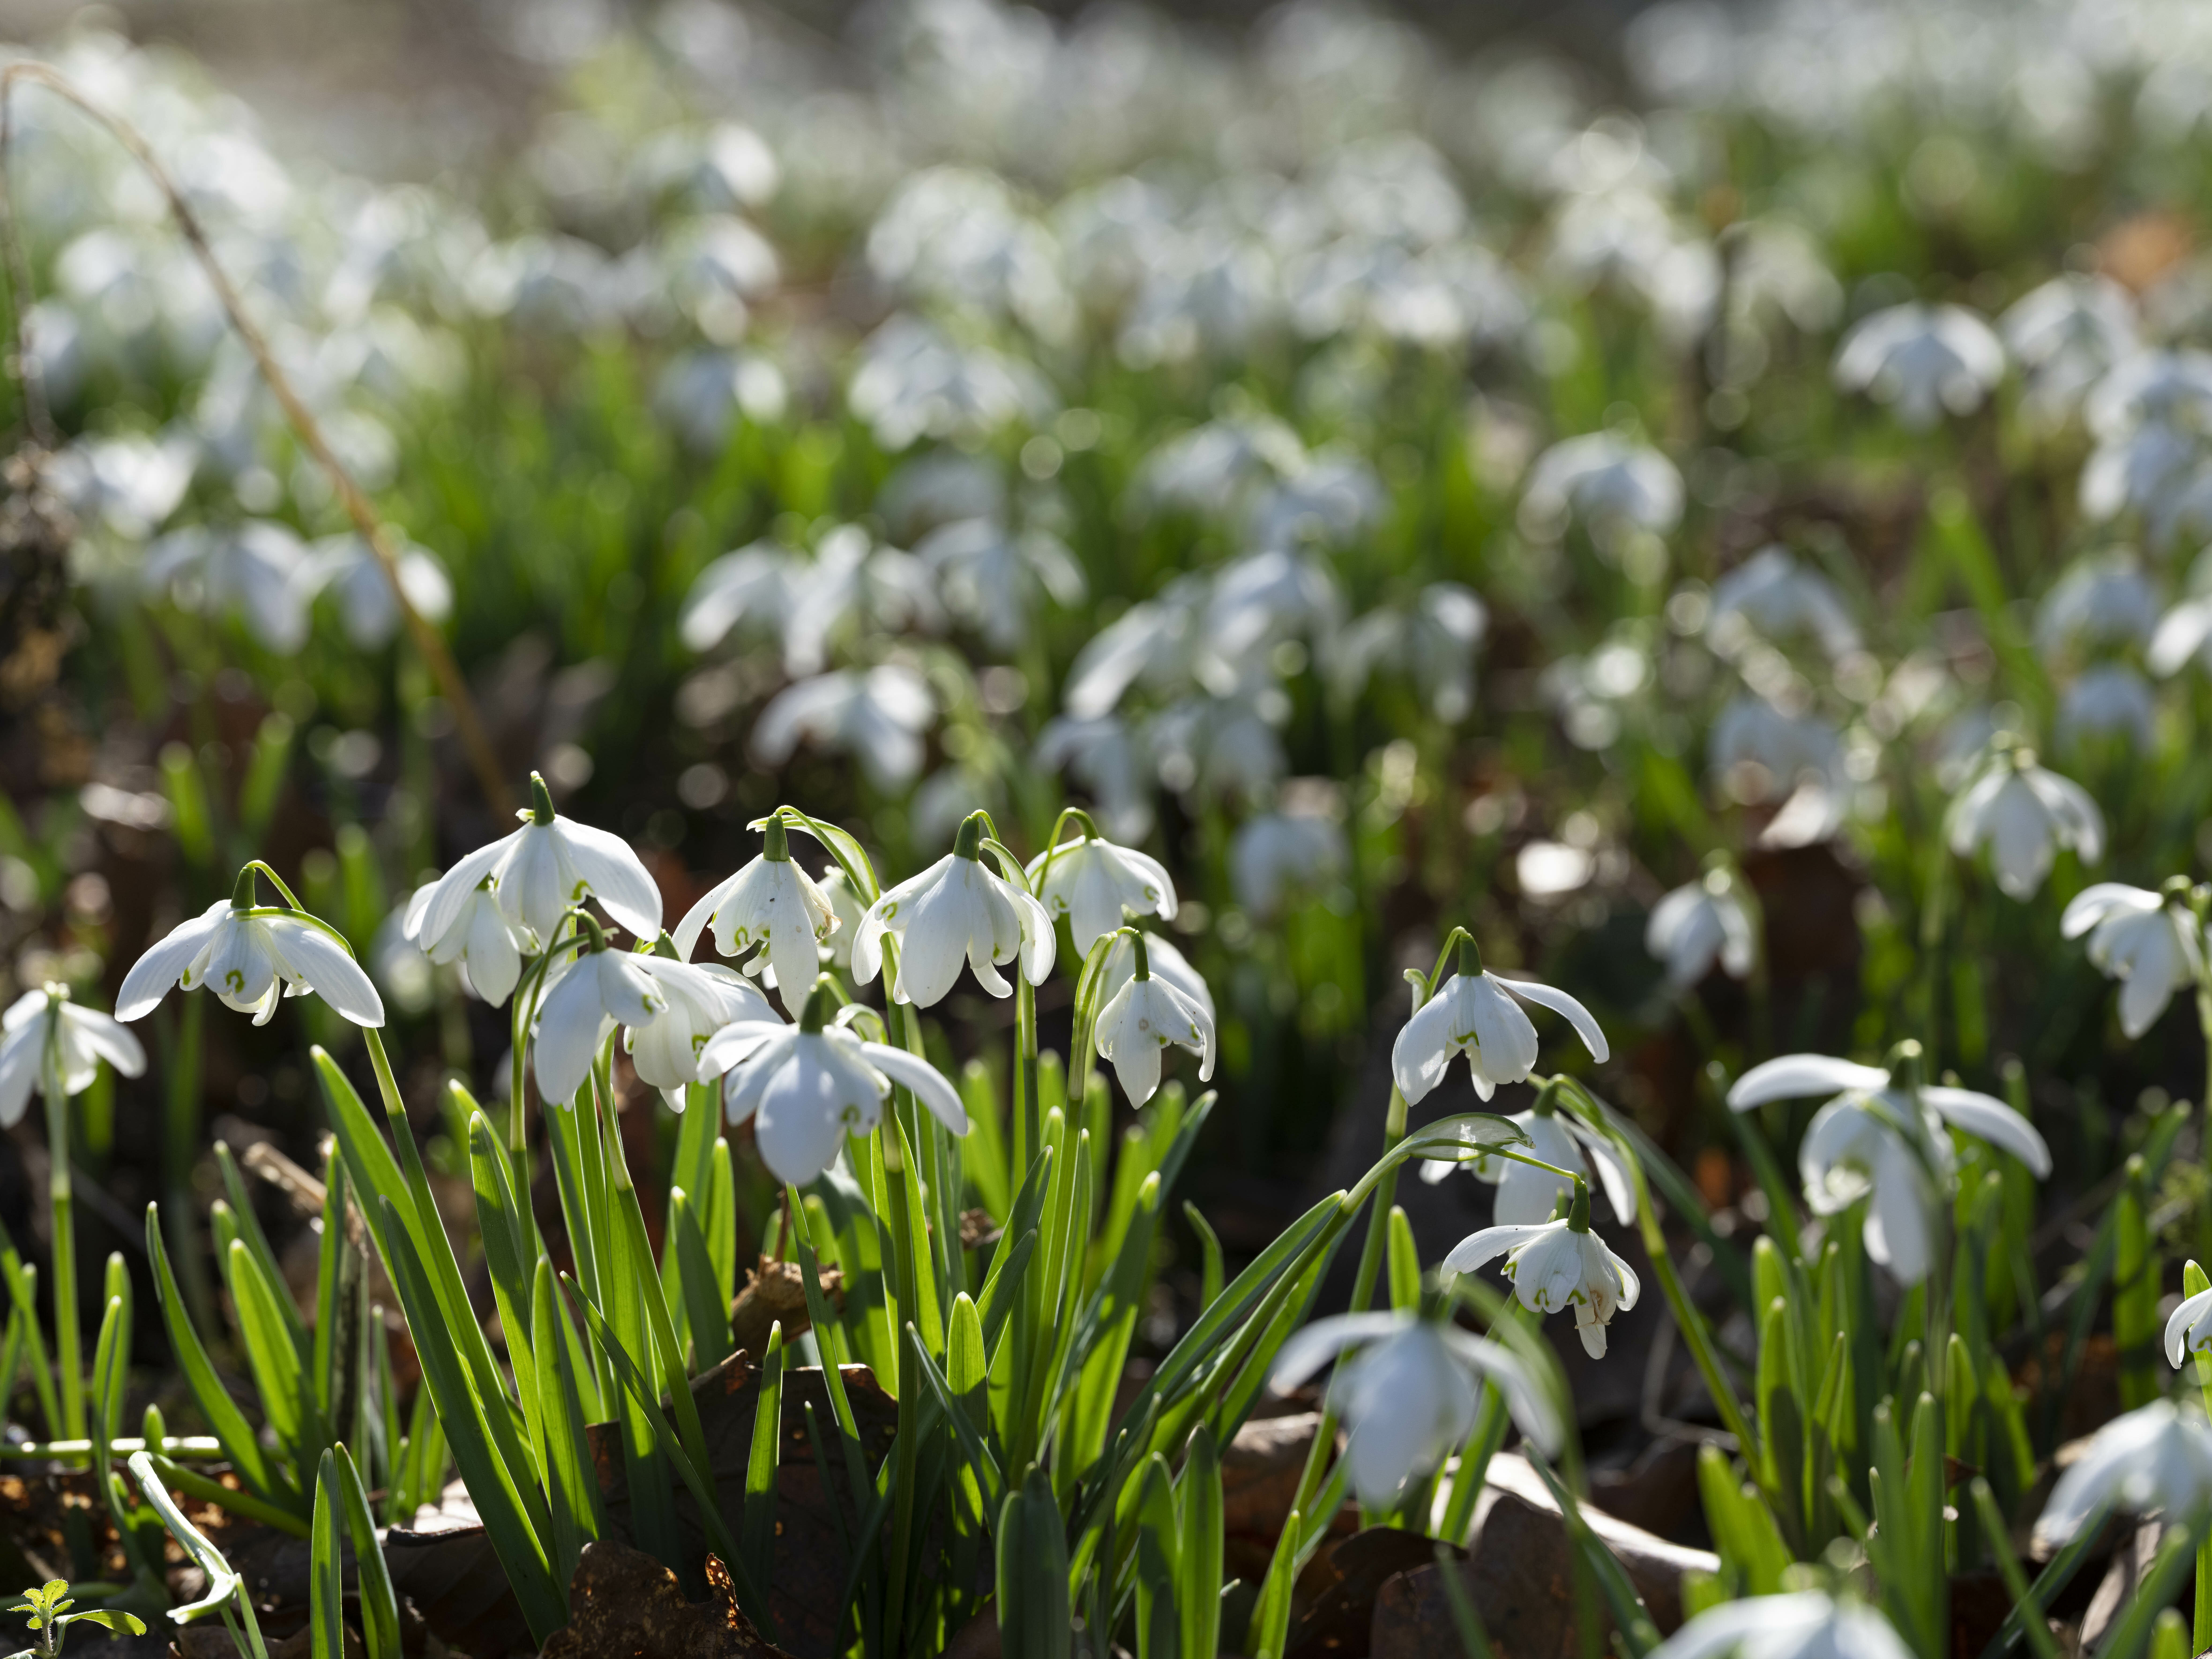 A carpet of snowdrops in spring sunshine.